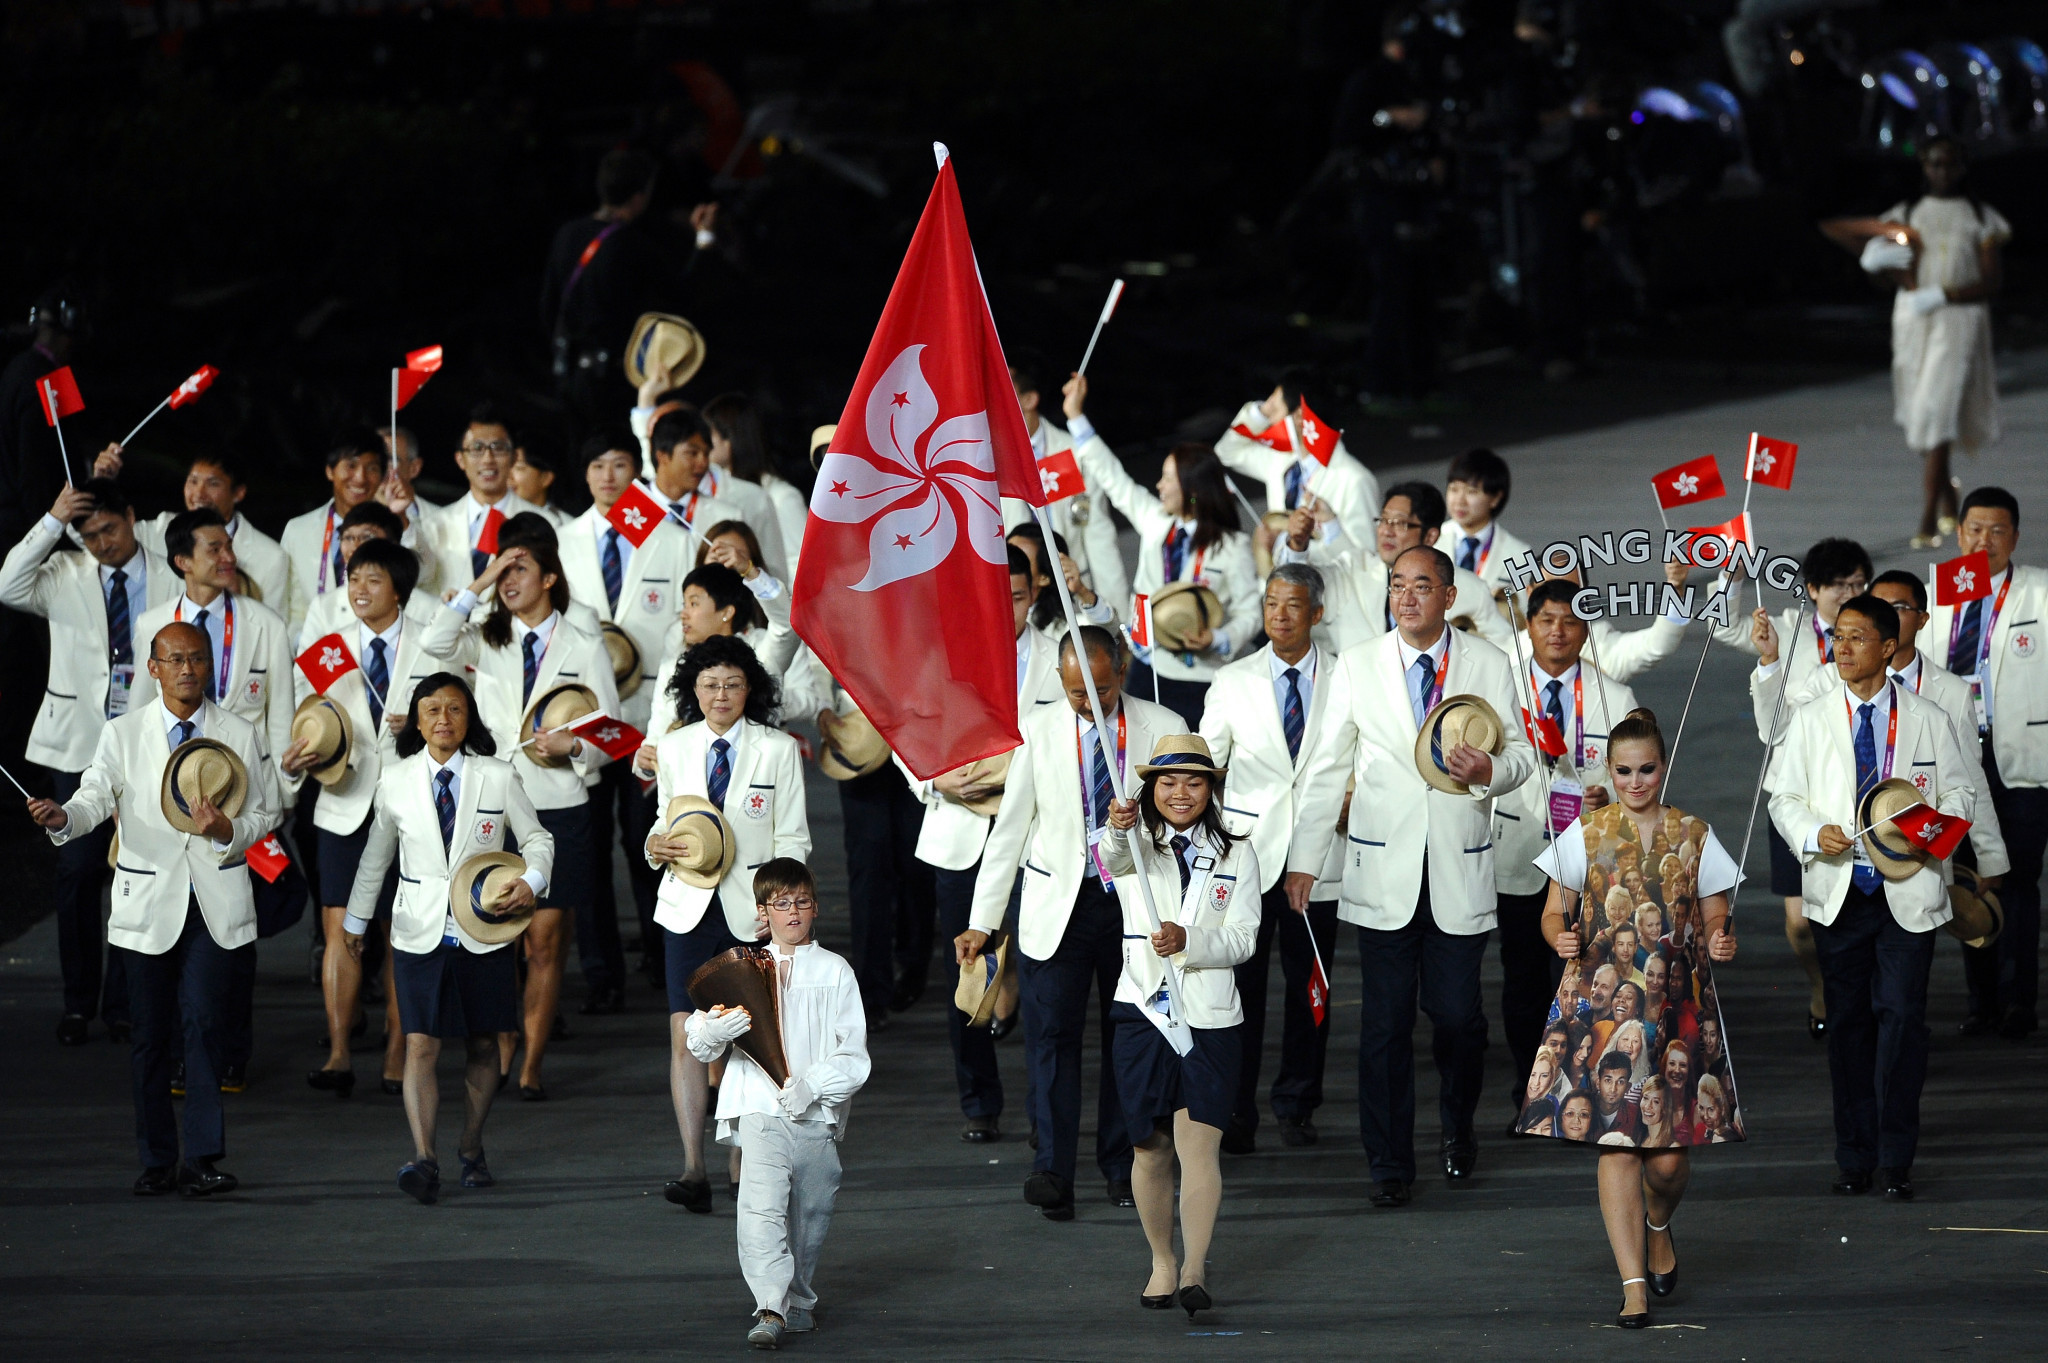 Hong Kong NOC pledges to improve transparency of athlete selection process